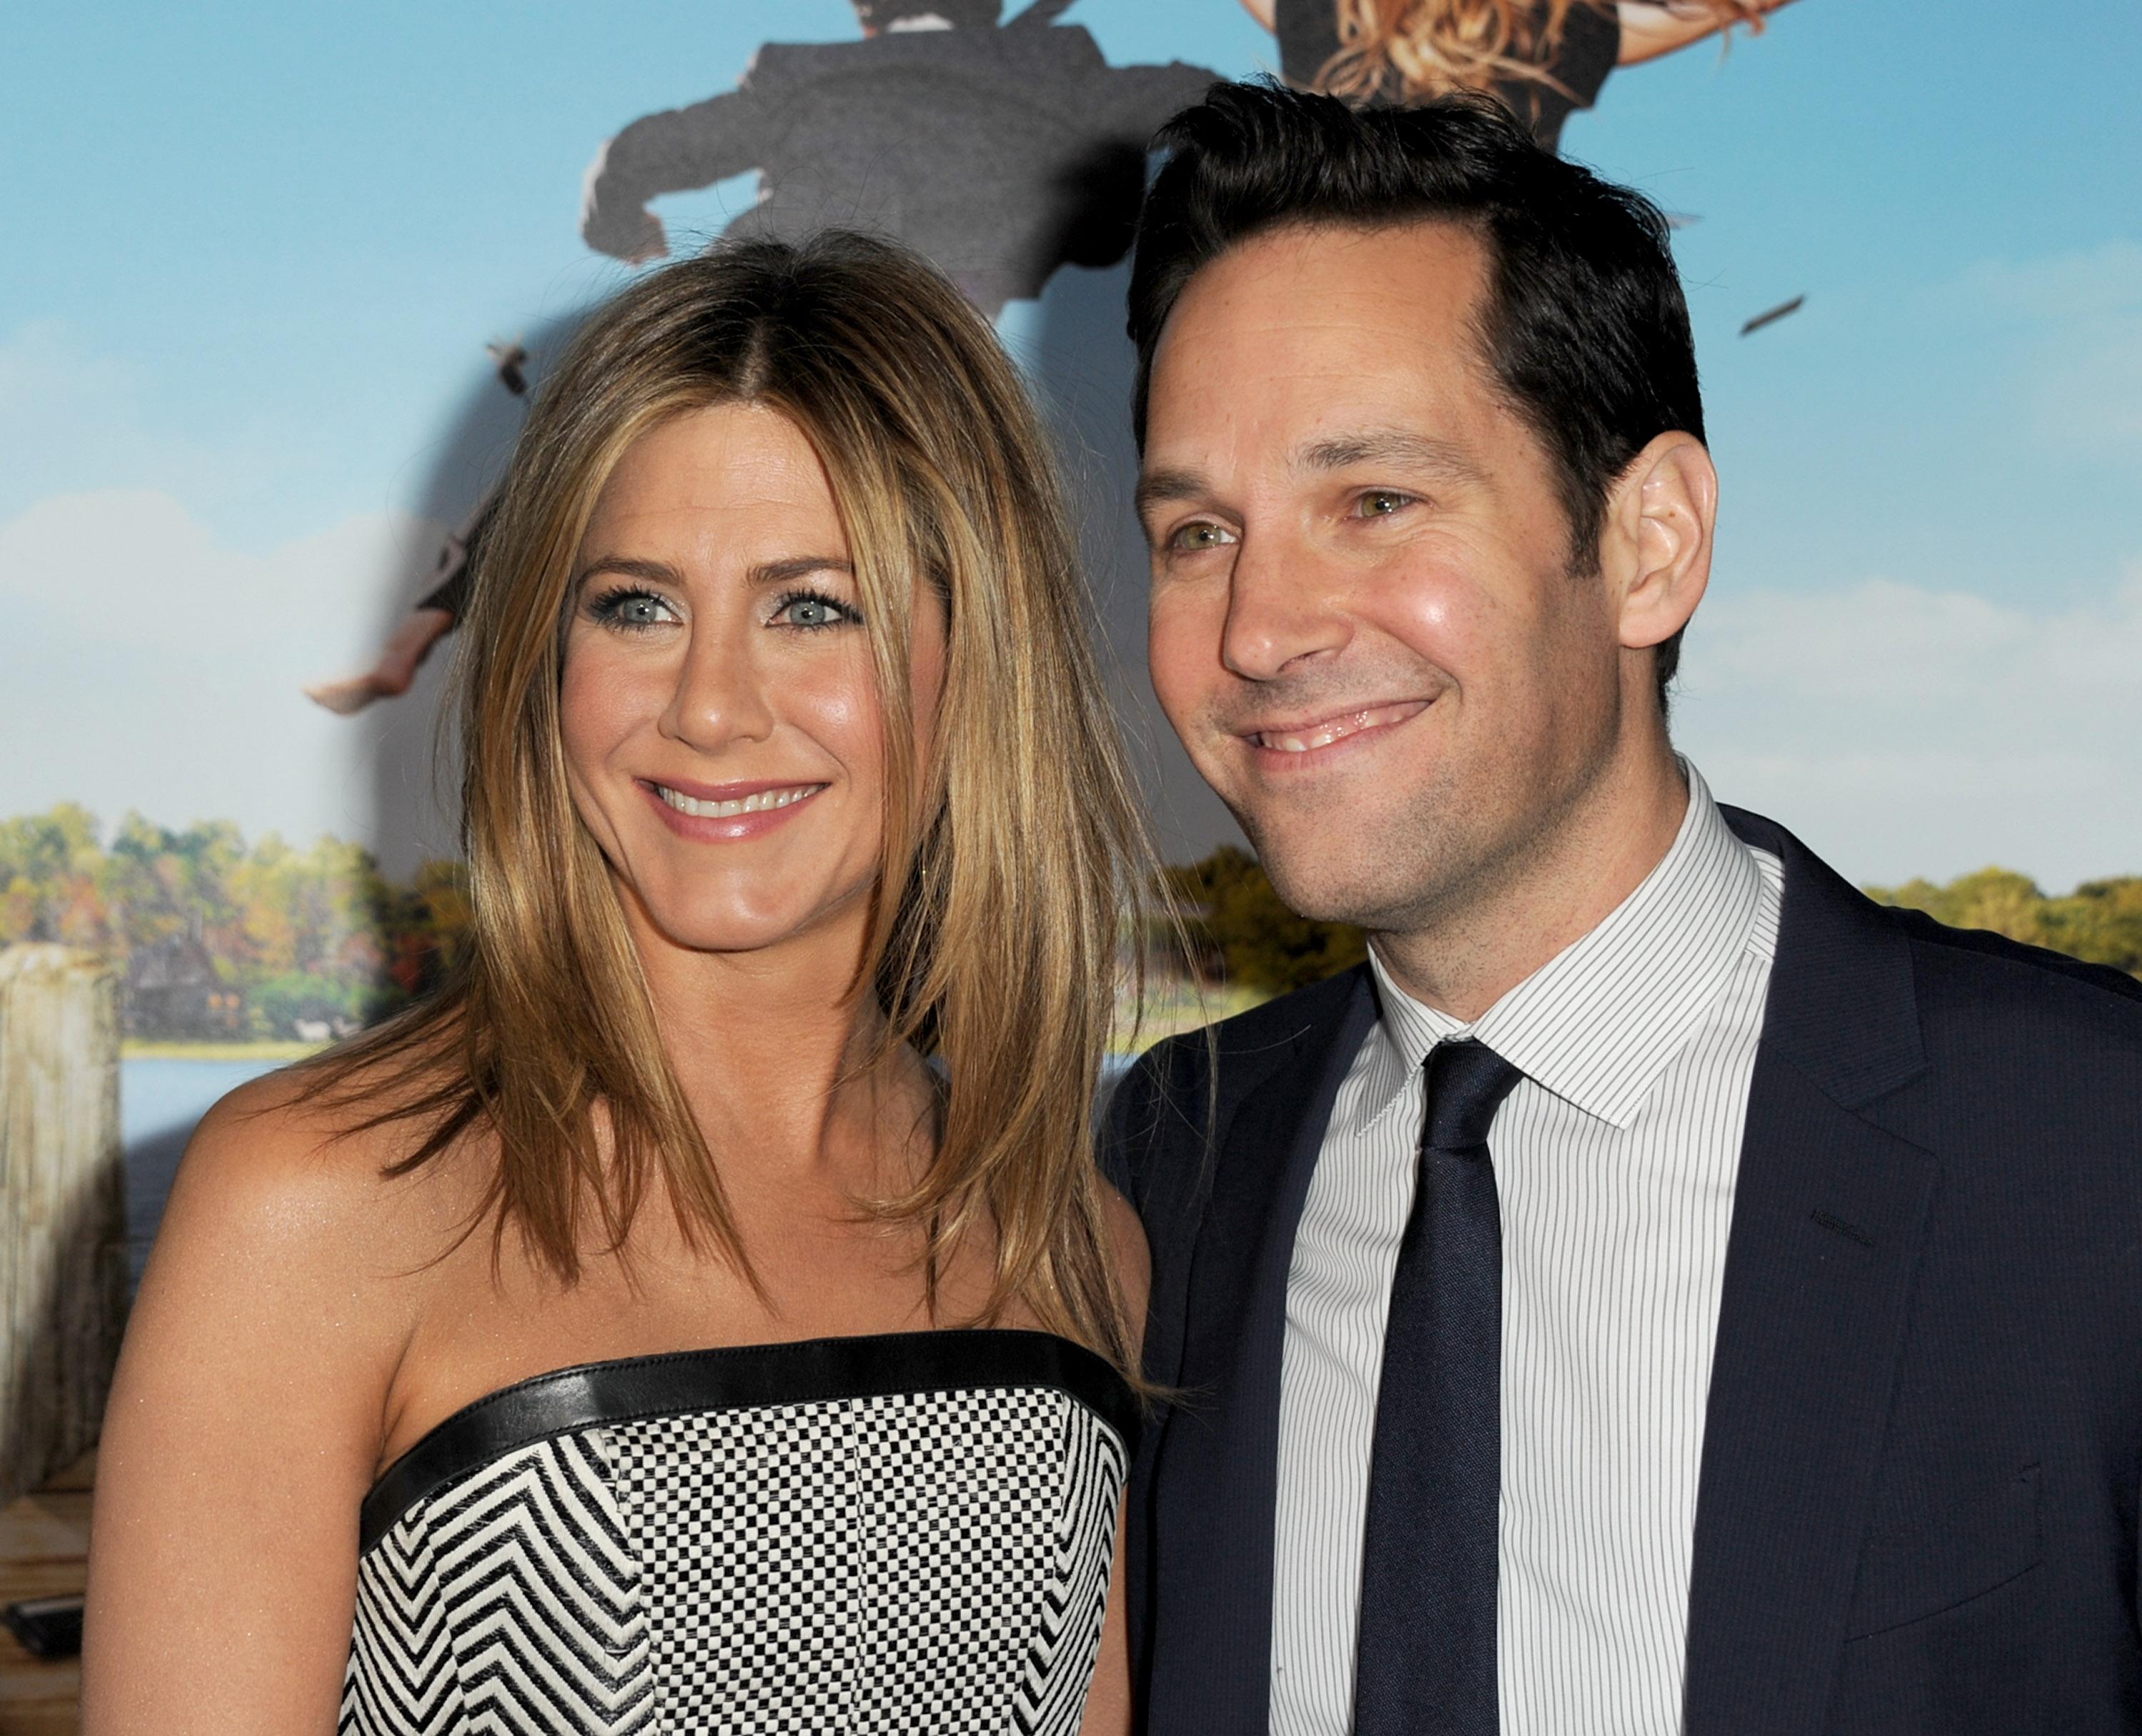 Who is jennifer aniston dating in 2018